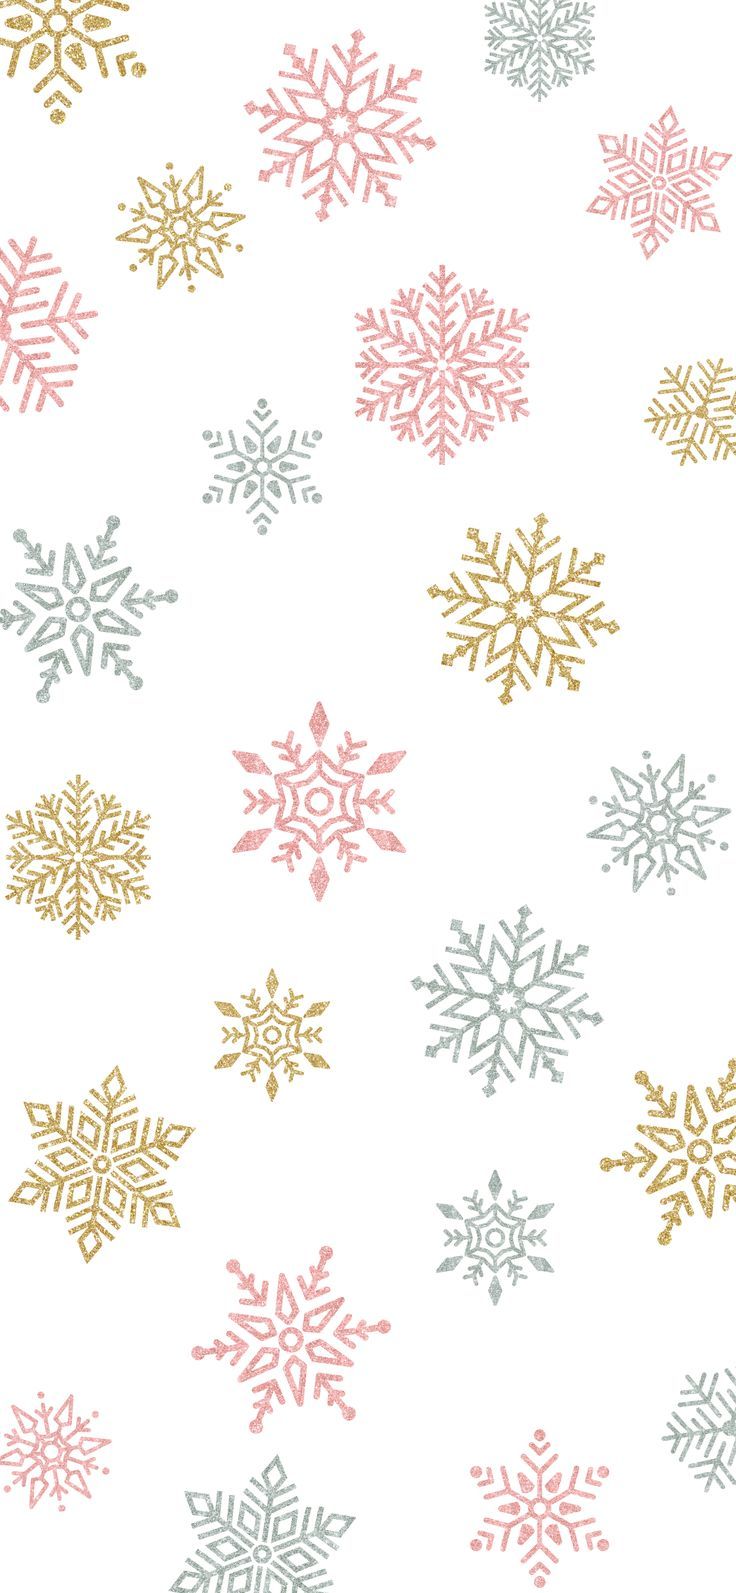 Trends For Snowflake Wallpaper For iPhone - Holiday iphone wallpaper, Wallpaper iphone christmas, Christmas phone wallpaper